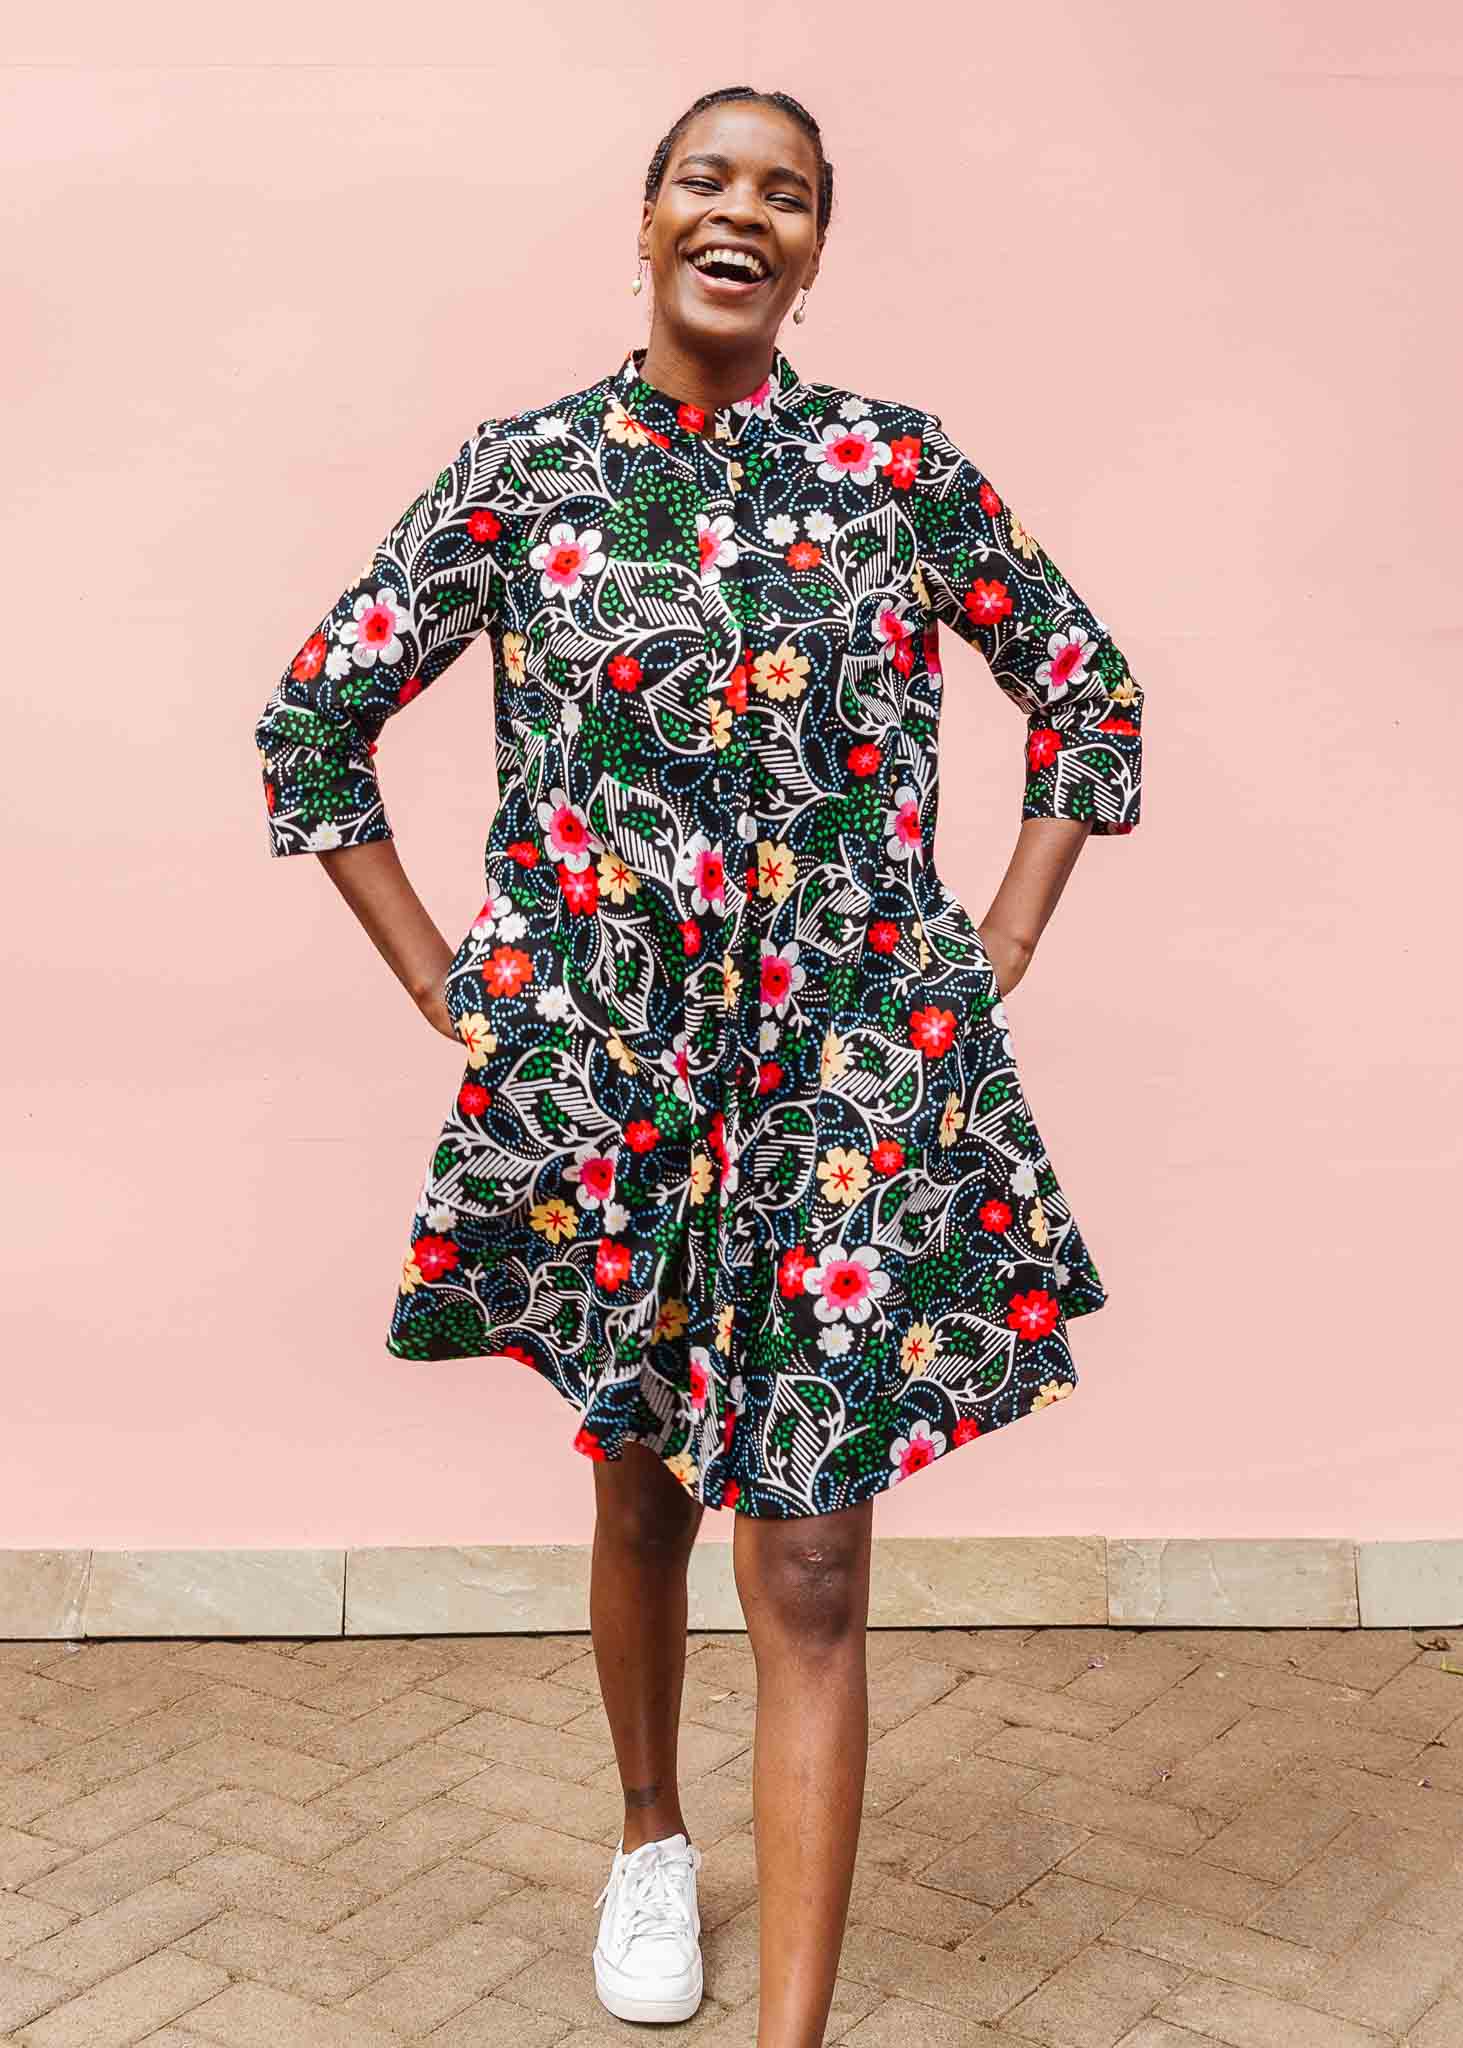 Model wearing black dress with white, green, red and yellow floral print.